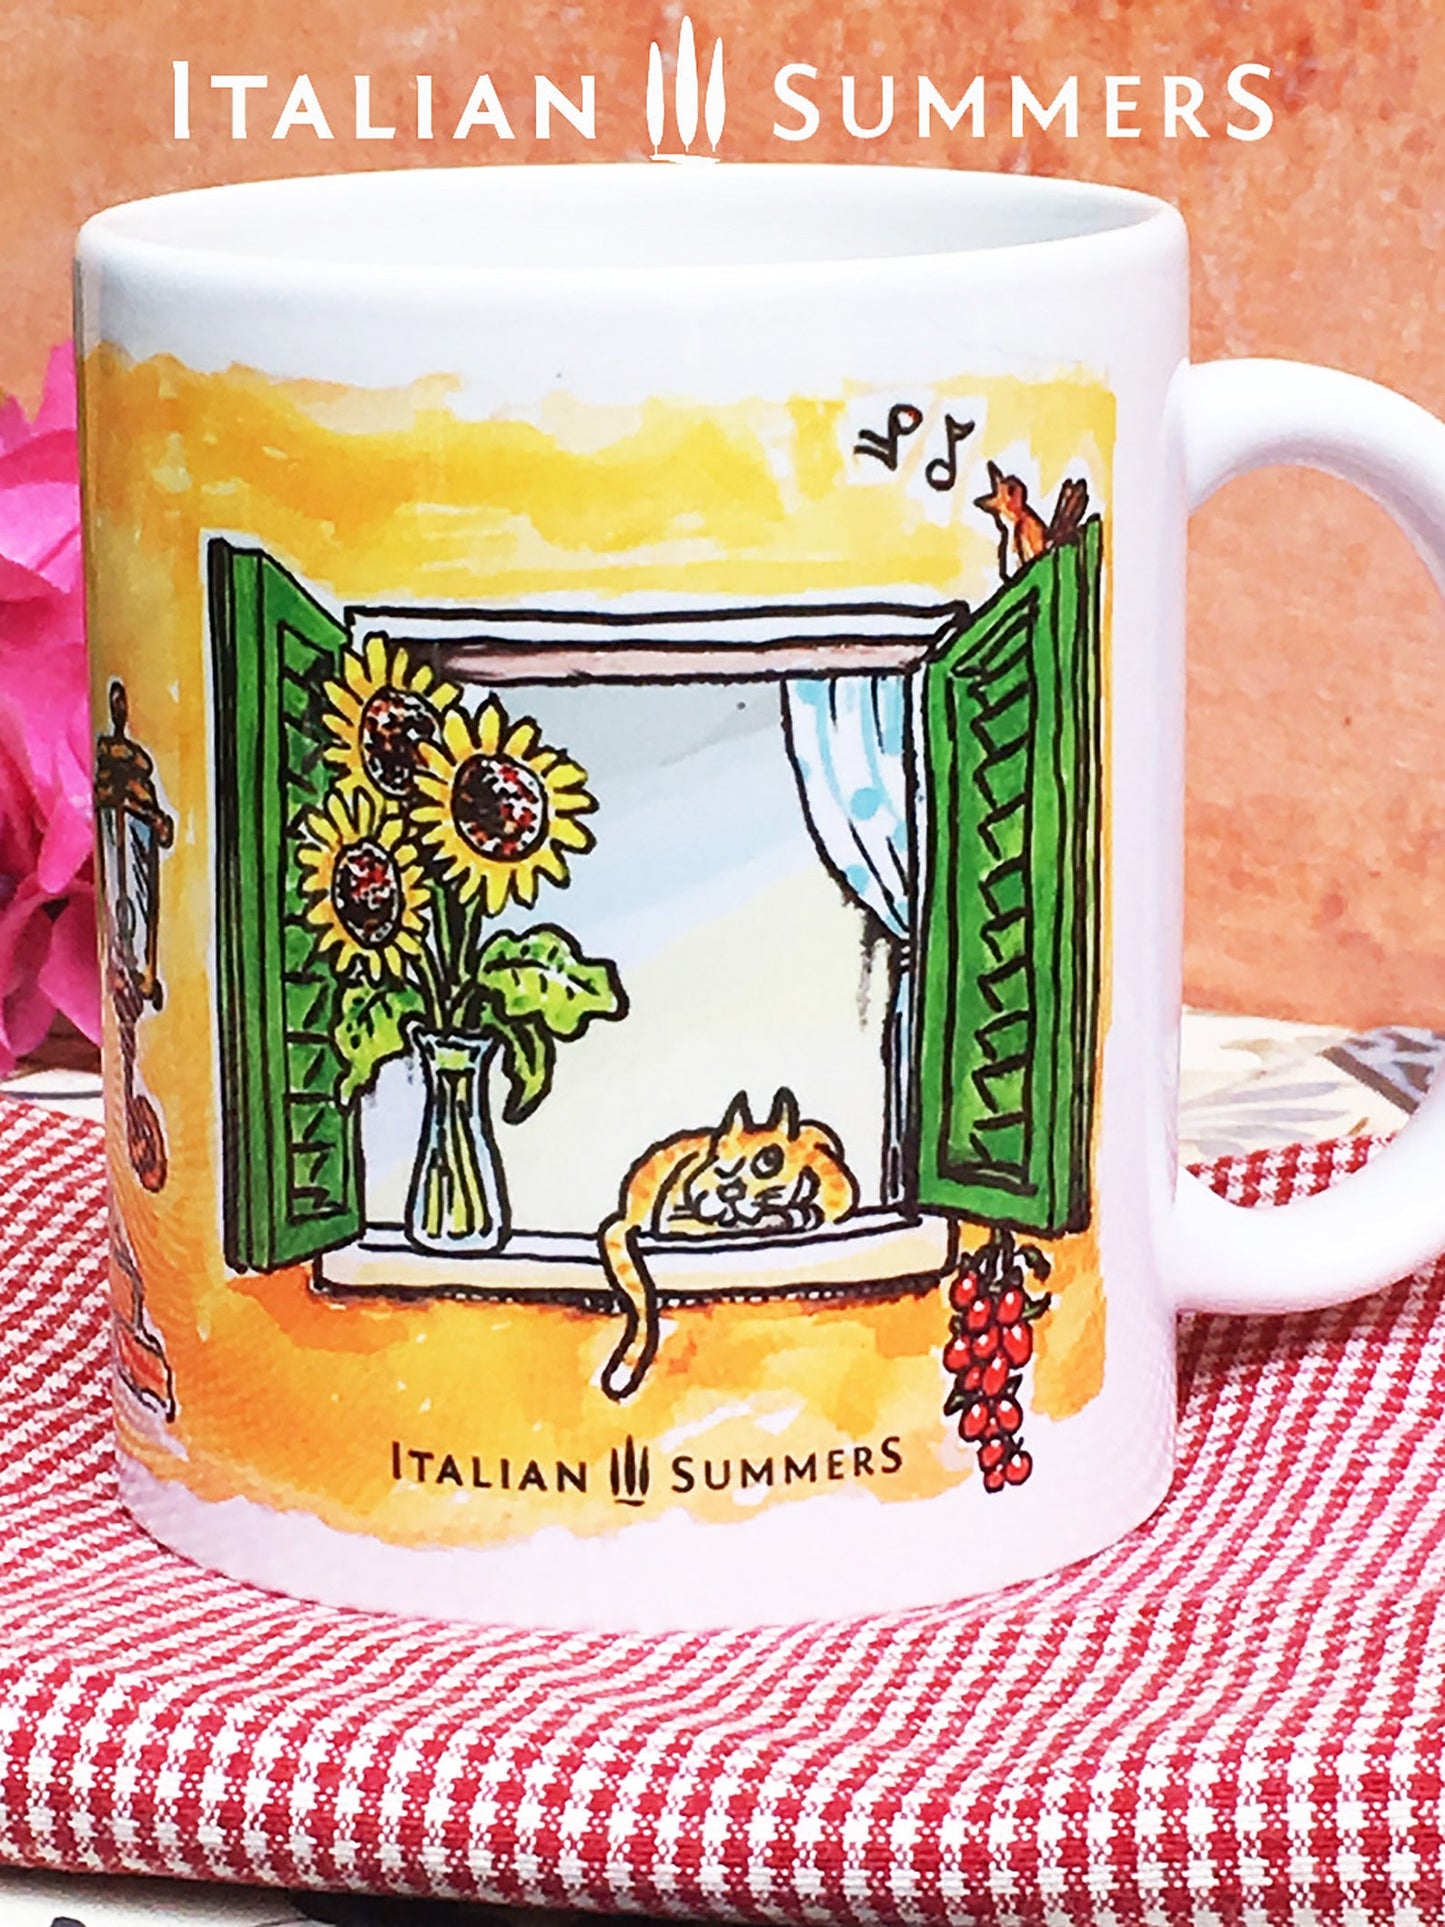 Italy inspired mug by sketches of an open Italian window. The window has green shutter, on the lower part of the windows hangs laundry in the color of the Italian flag. In the window sill ther is a red coffee mug and an Italian coffee poet, la moka. The Italian window is surrounded by a terracotta wall. Above the window there is written 'Buongiorno Italia' in black handwriting. Made by Italian Summers